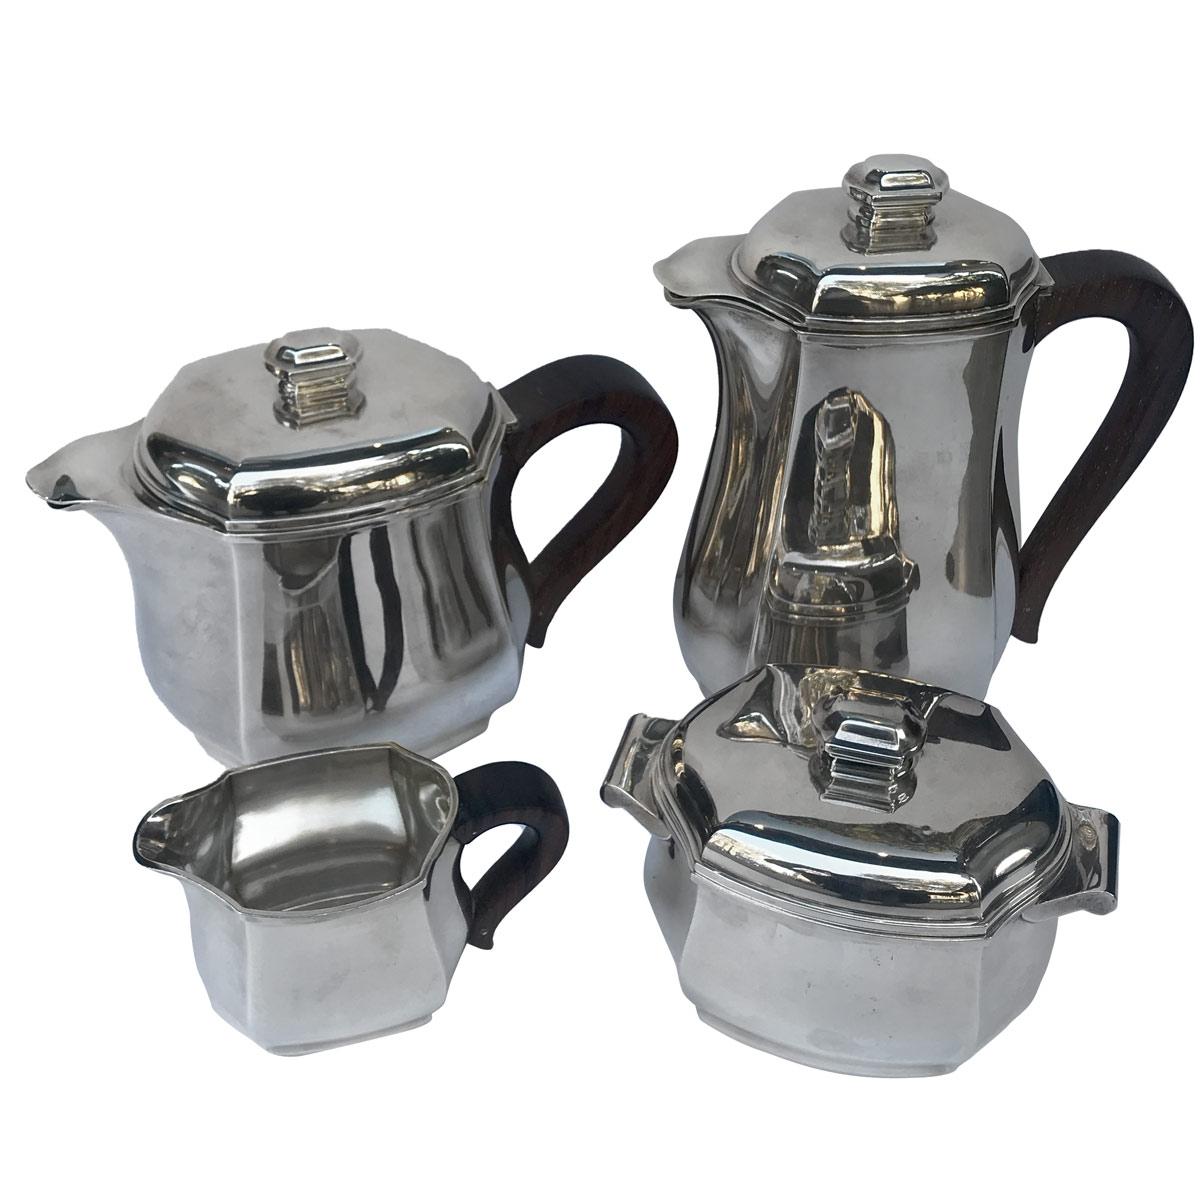 Art Déco style silver coffee and tea set composed of 4 pieces: one teapot, one coffeepot, one sugar bowl, and a milk jug. Silver decorated with pinched ribs decoration and flat areas. French Minerve silver mark, silversmith mark and each piece is